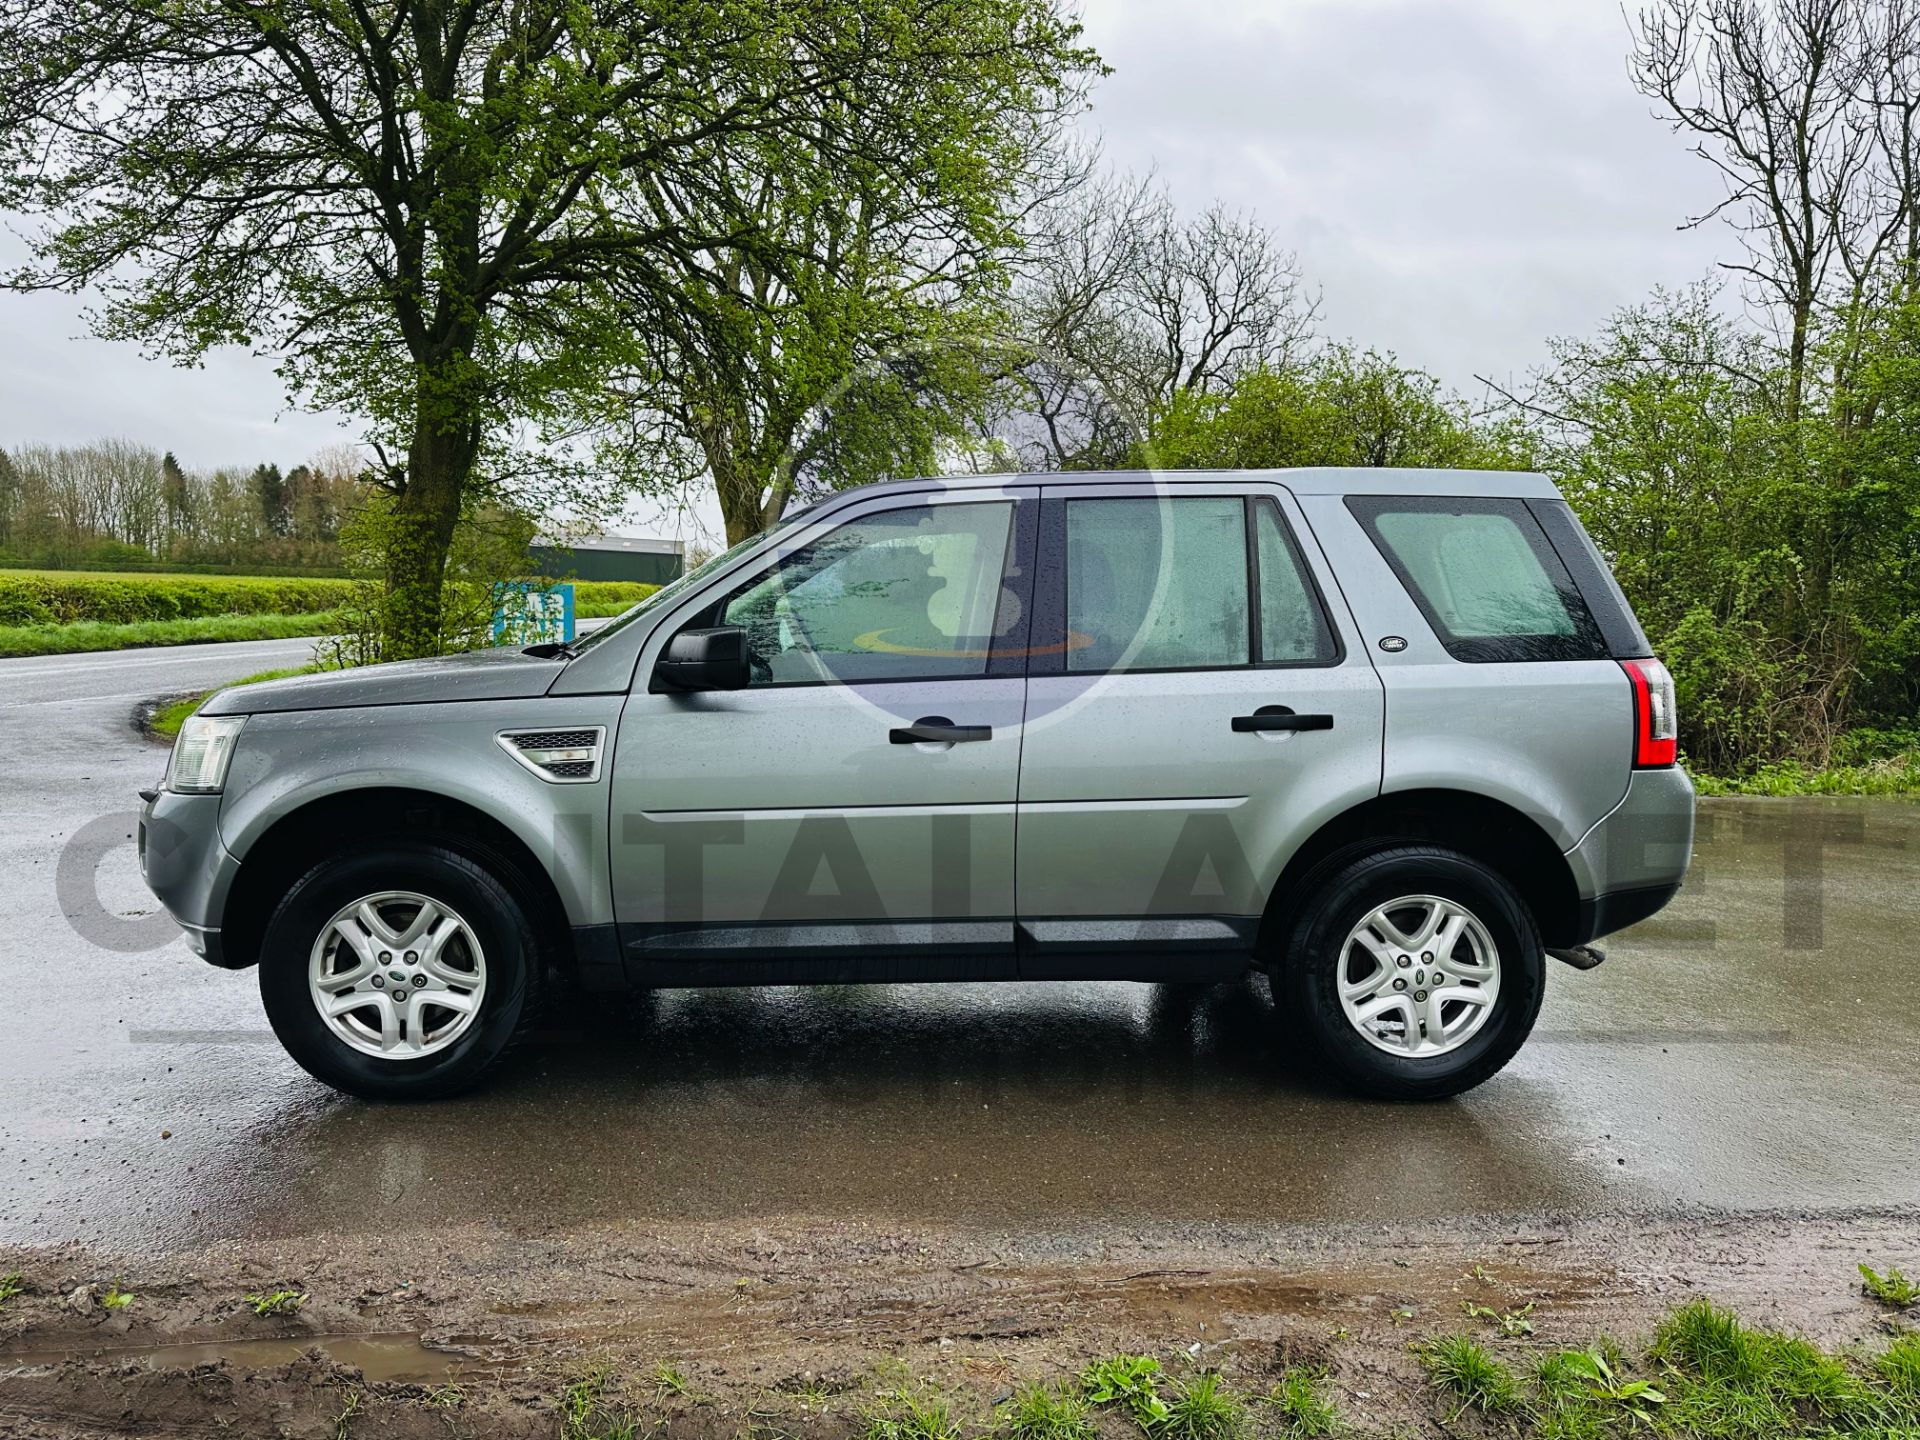 (ON SALE) LANDROVER FREELANDER 2.2TD4 S EDITION "AUTO - 2012 MODEL - AIR CON - FSH - Image 6 of 33